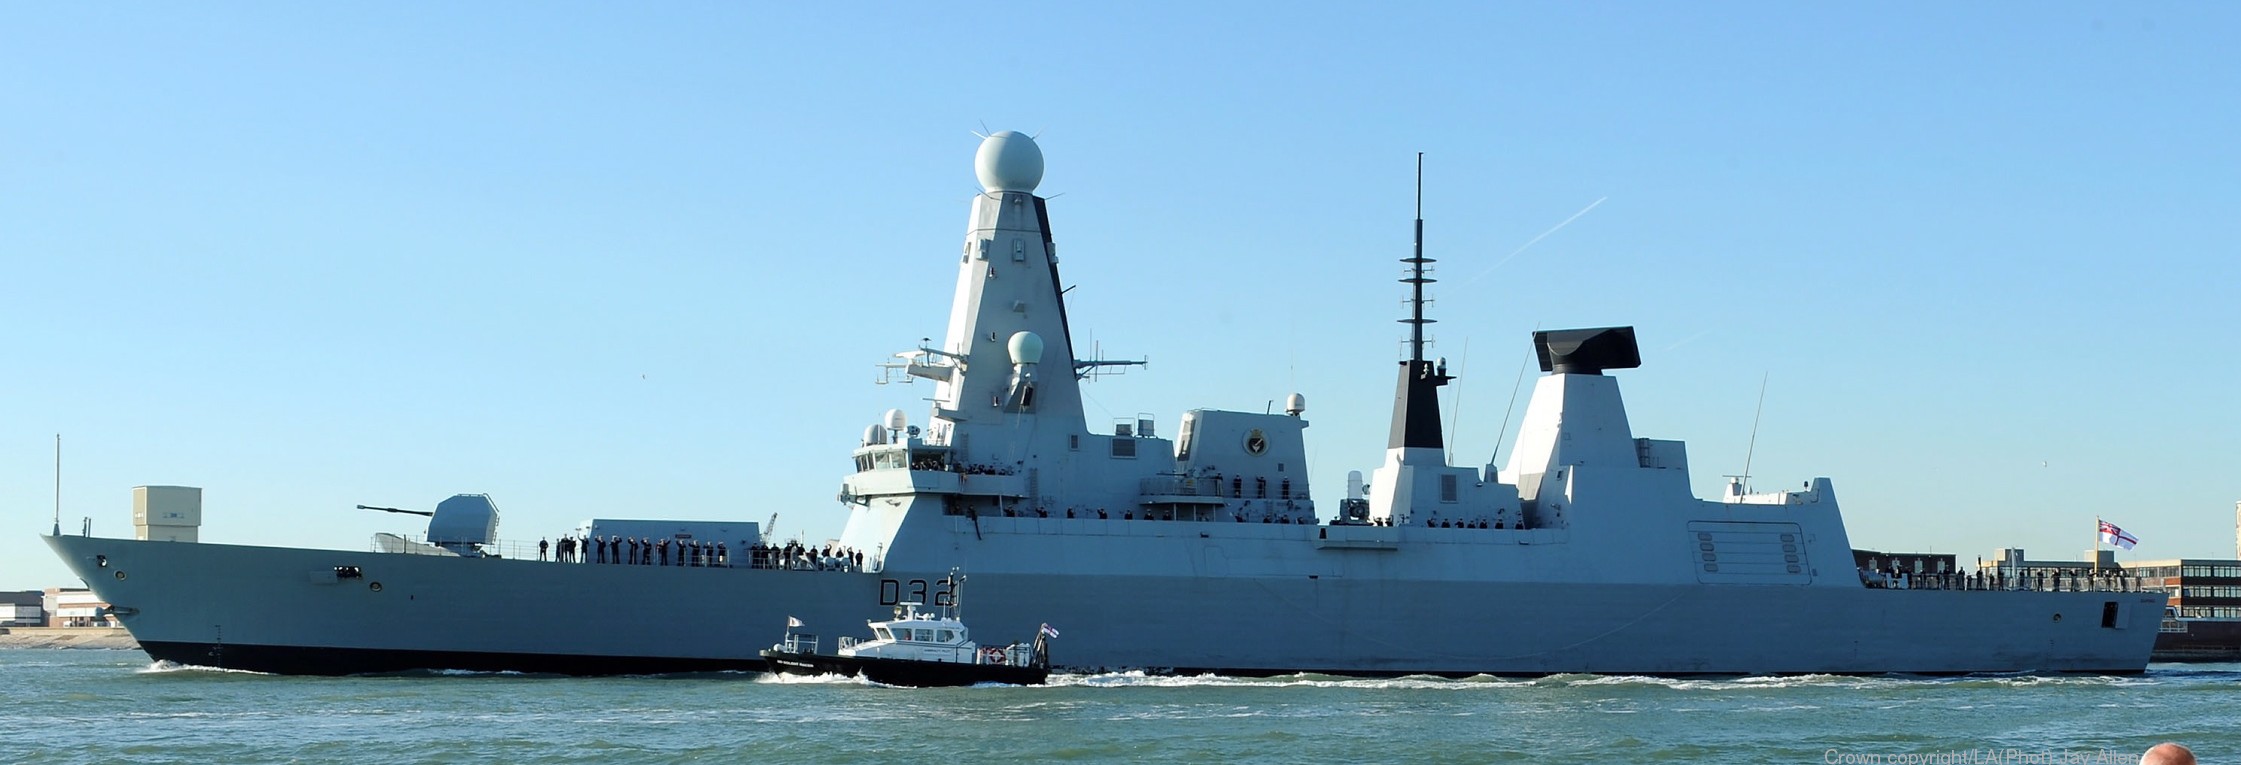 hms daring d-32 type 45 class guided missile destroyer royal navy sea viper paams 31